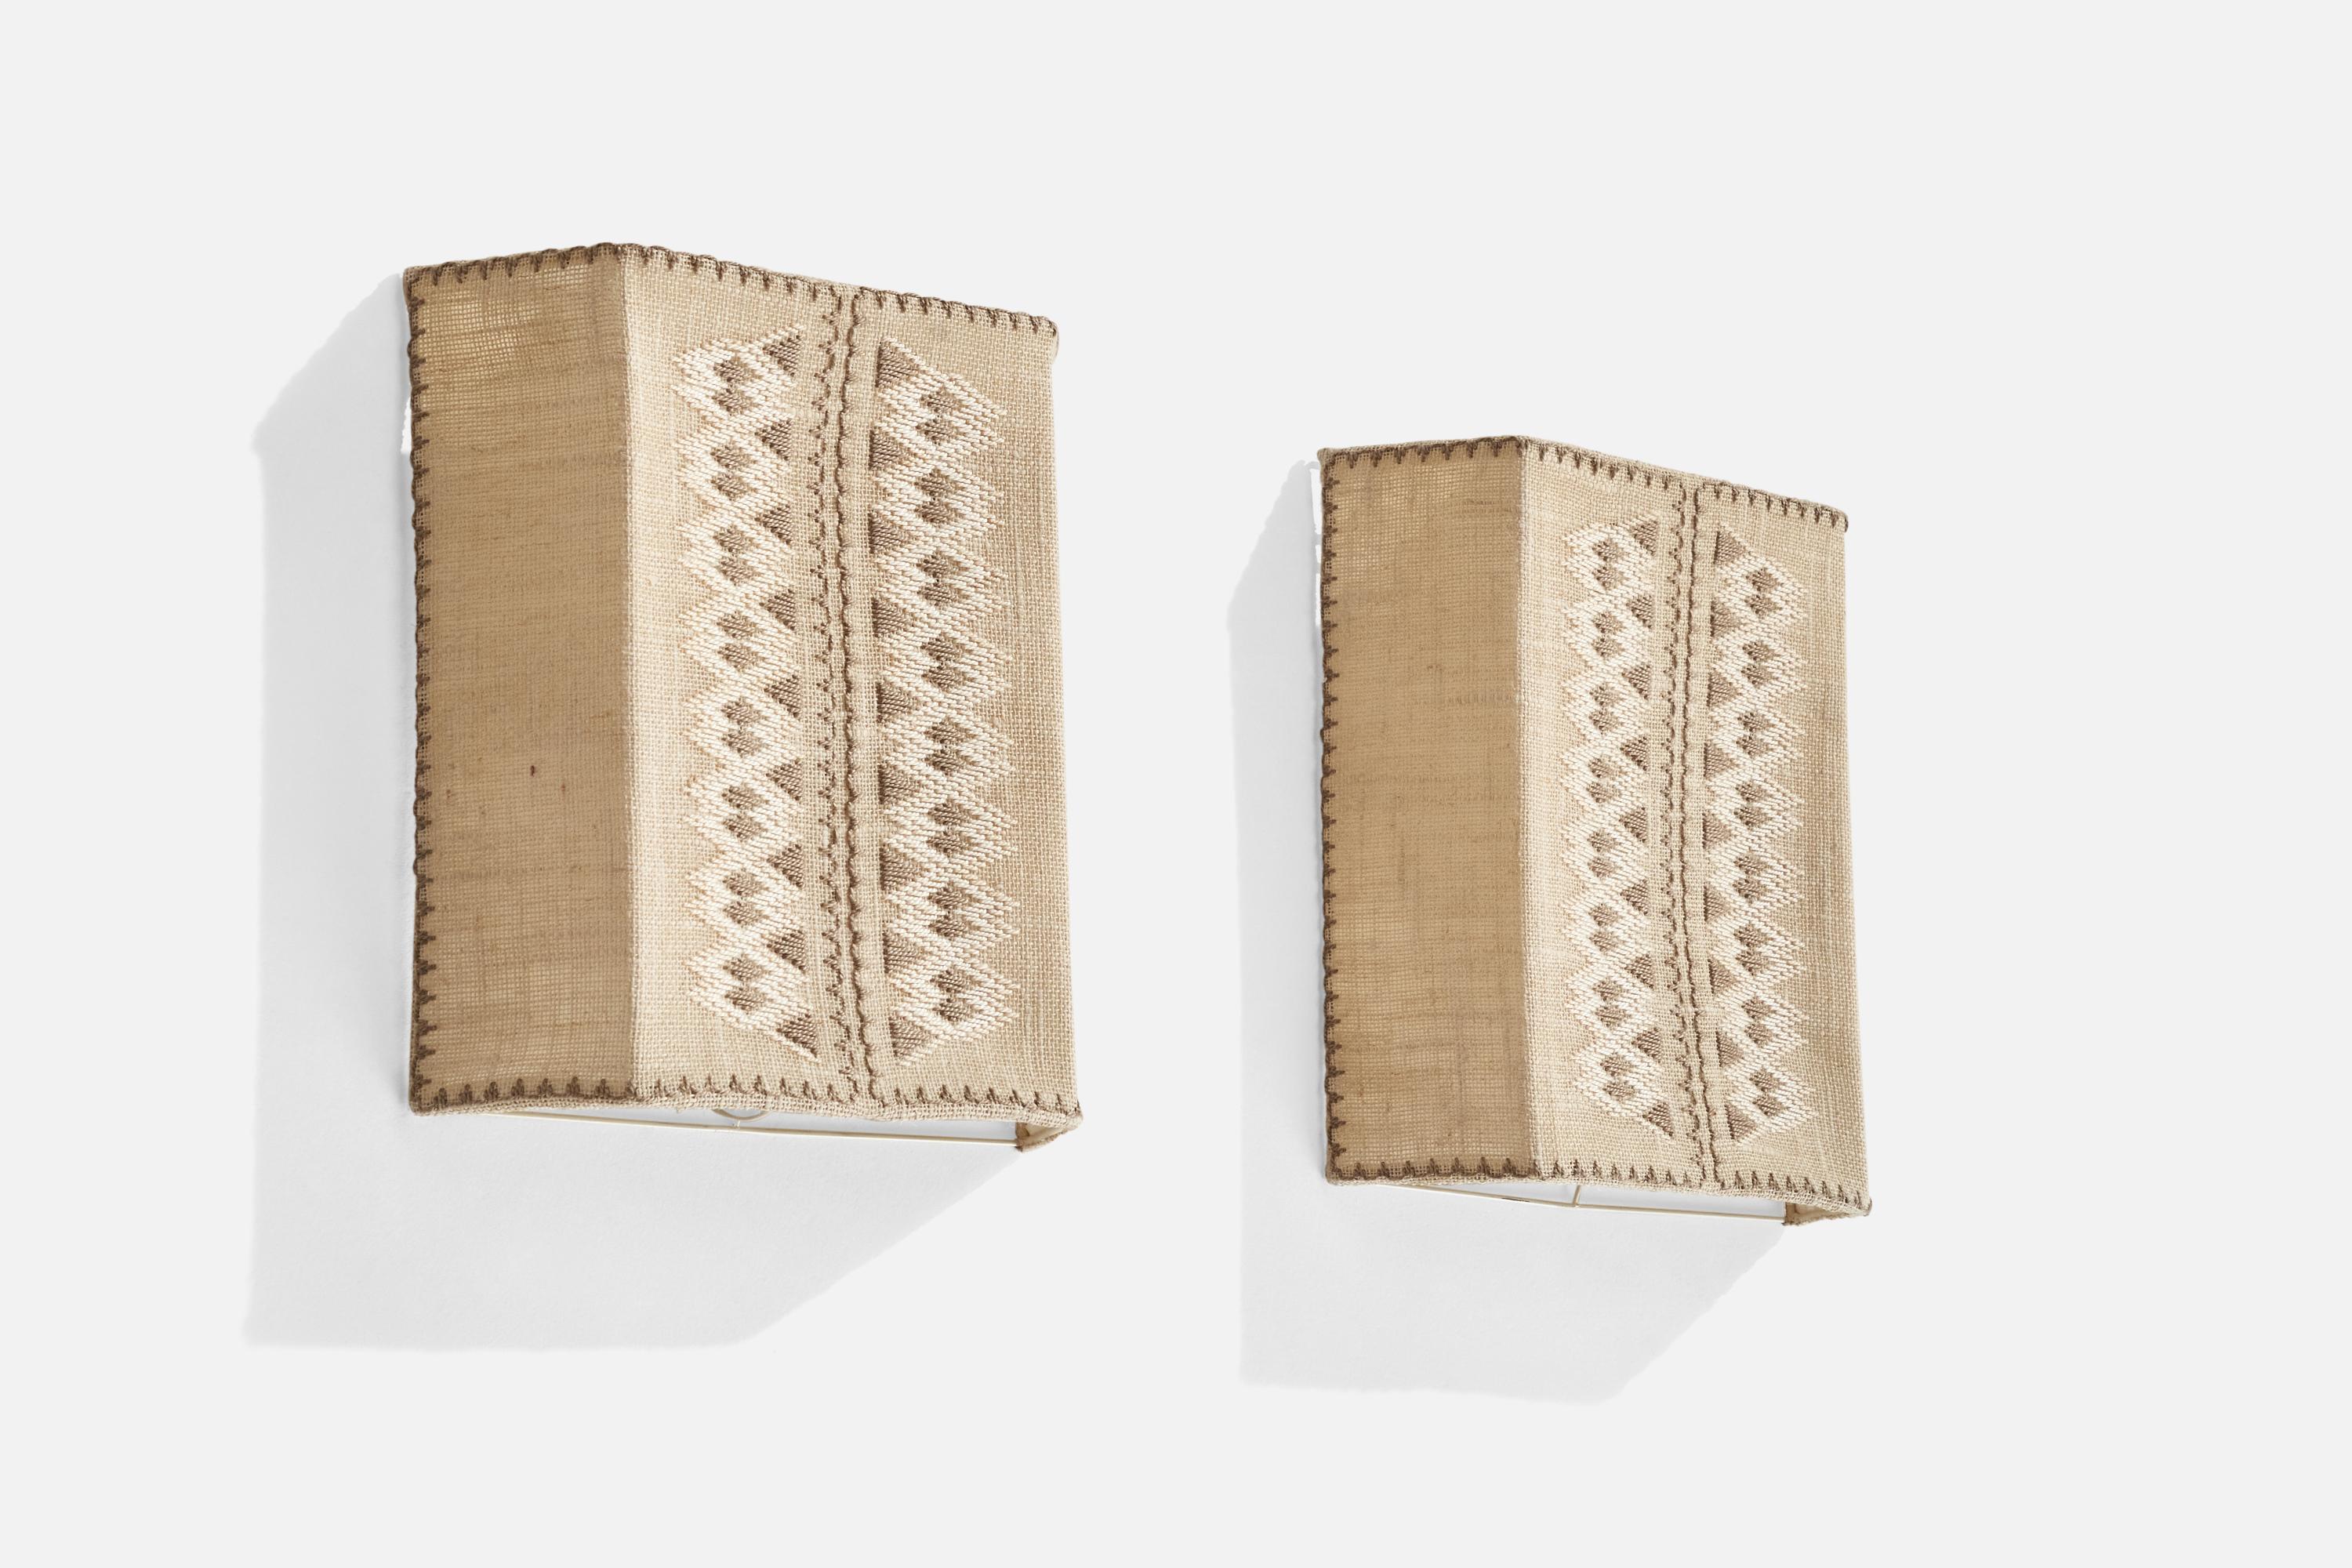 A pair of hand-embroidered fabric wall lights designed and produced in Sweden, c. 1950s.

Overall Dimensions (inches): 13.75” H x 12” W x 4” D
Back Plate Dimensions (inches):N/A
Bulb Specifications: E-14 Bulb
Number of Sockets: 2
All lighting will